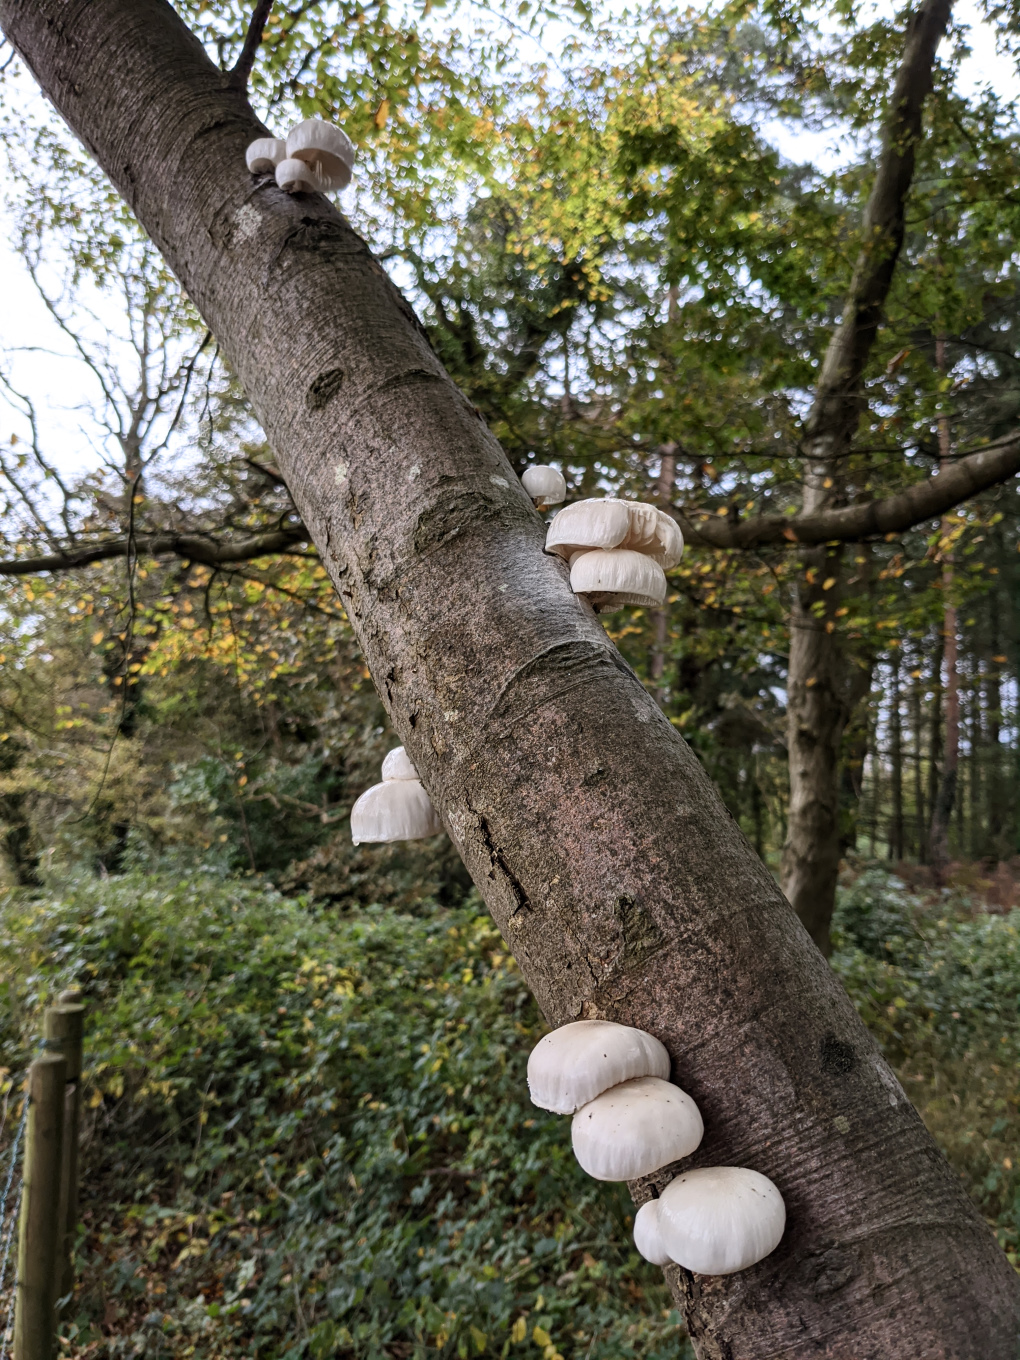 Glossy white cup mushrooms growing in clusters of 3 or 4, on a narrow, silvery grey tree (North Somerset, England)